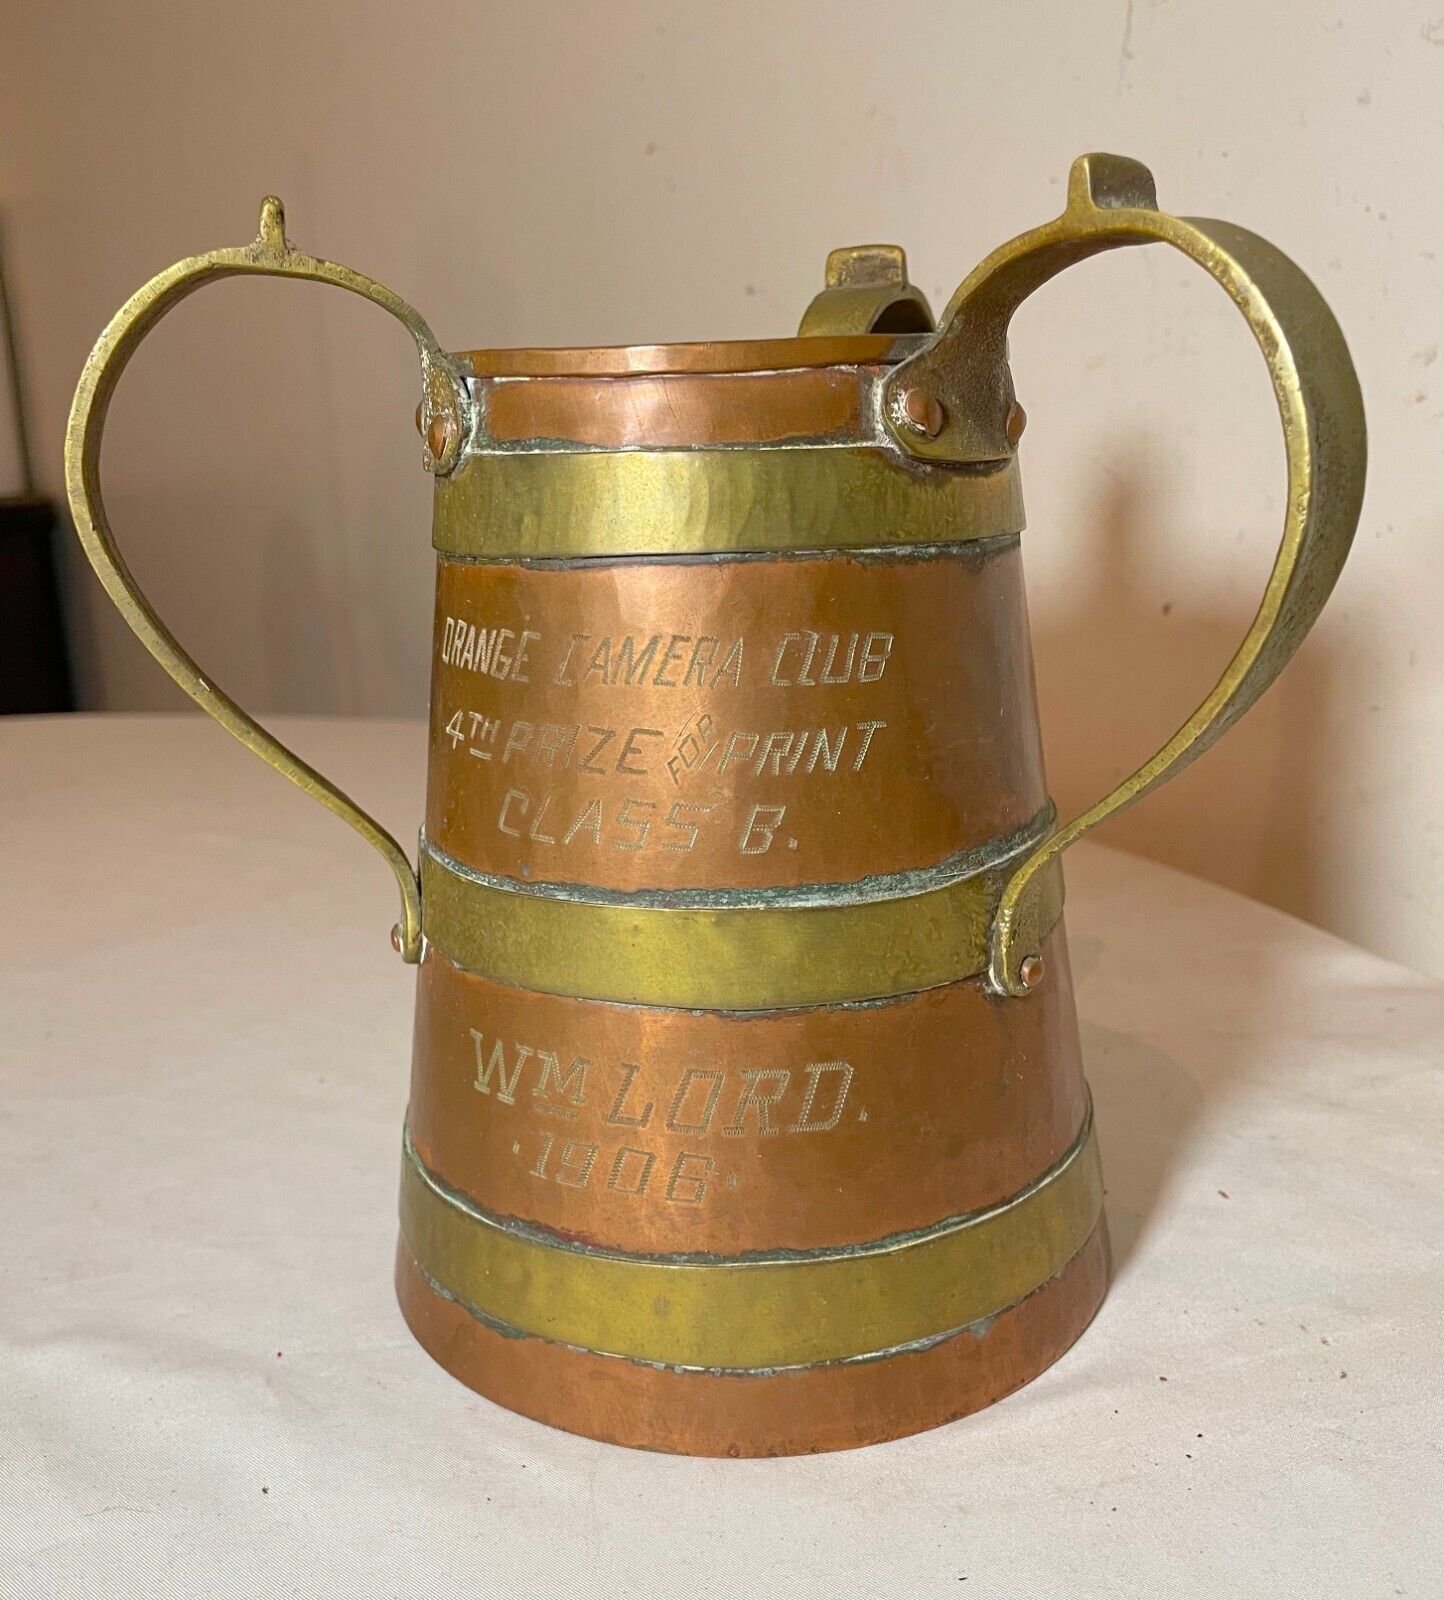 Antique 1906 3Handle Beer Stein Copper Brass Camera Club Photograph Award Trophy